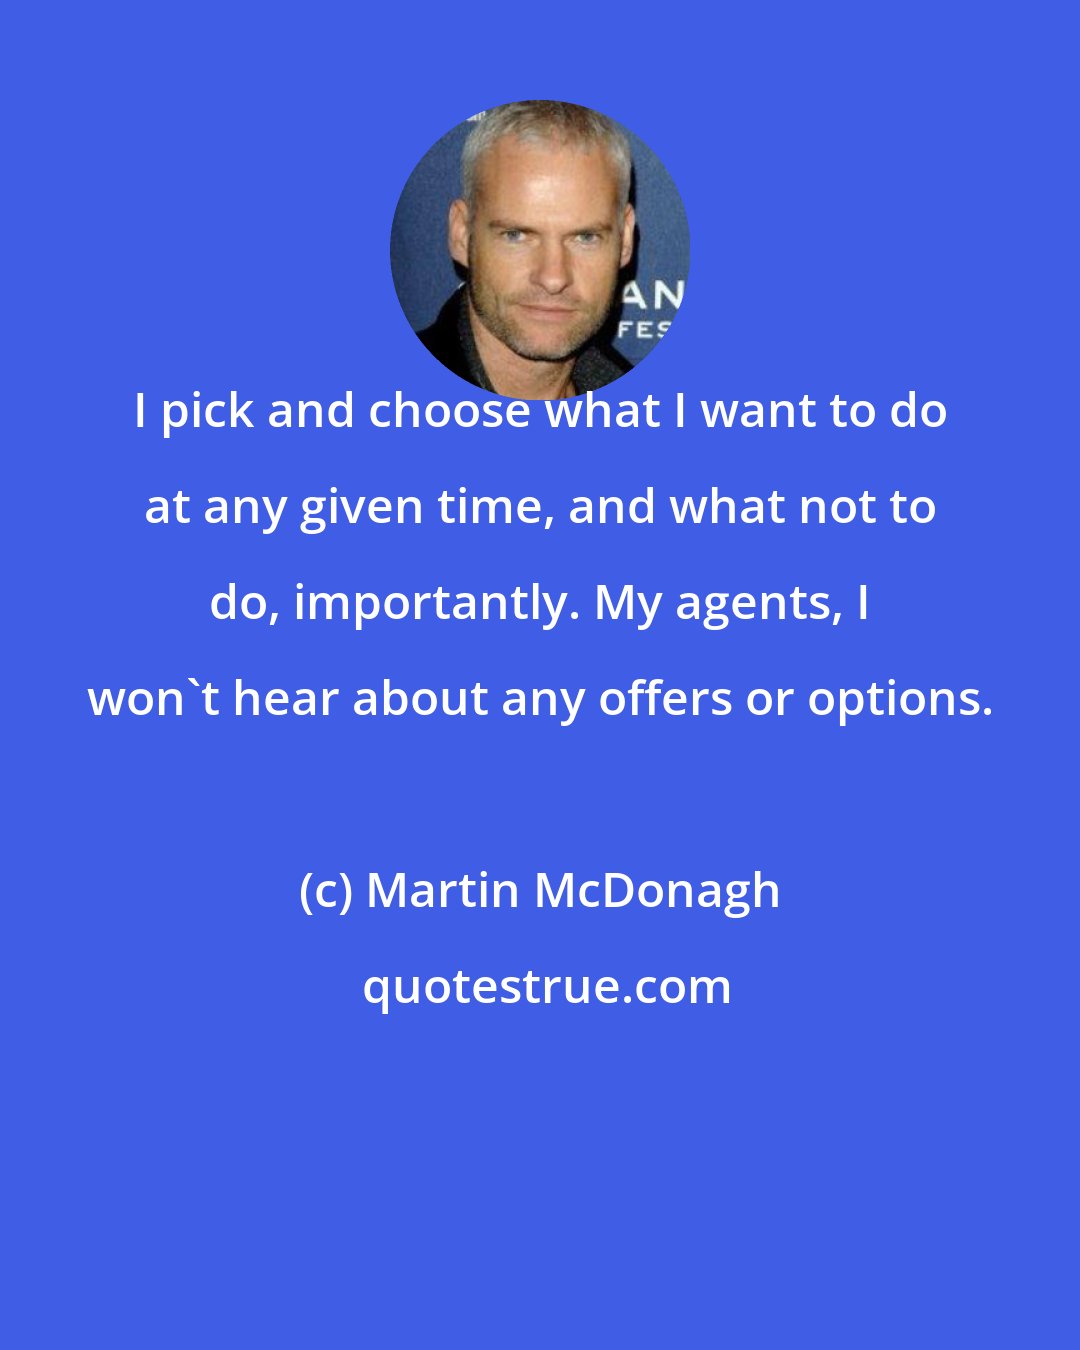 Martin McDonagh: I pick and choose what I want to do at any given time, and what not to do, importantly. My agents, I won't hear about any offers or options.